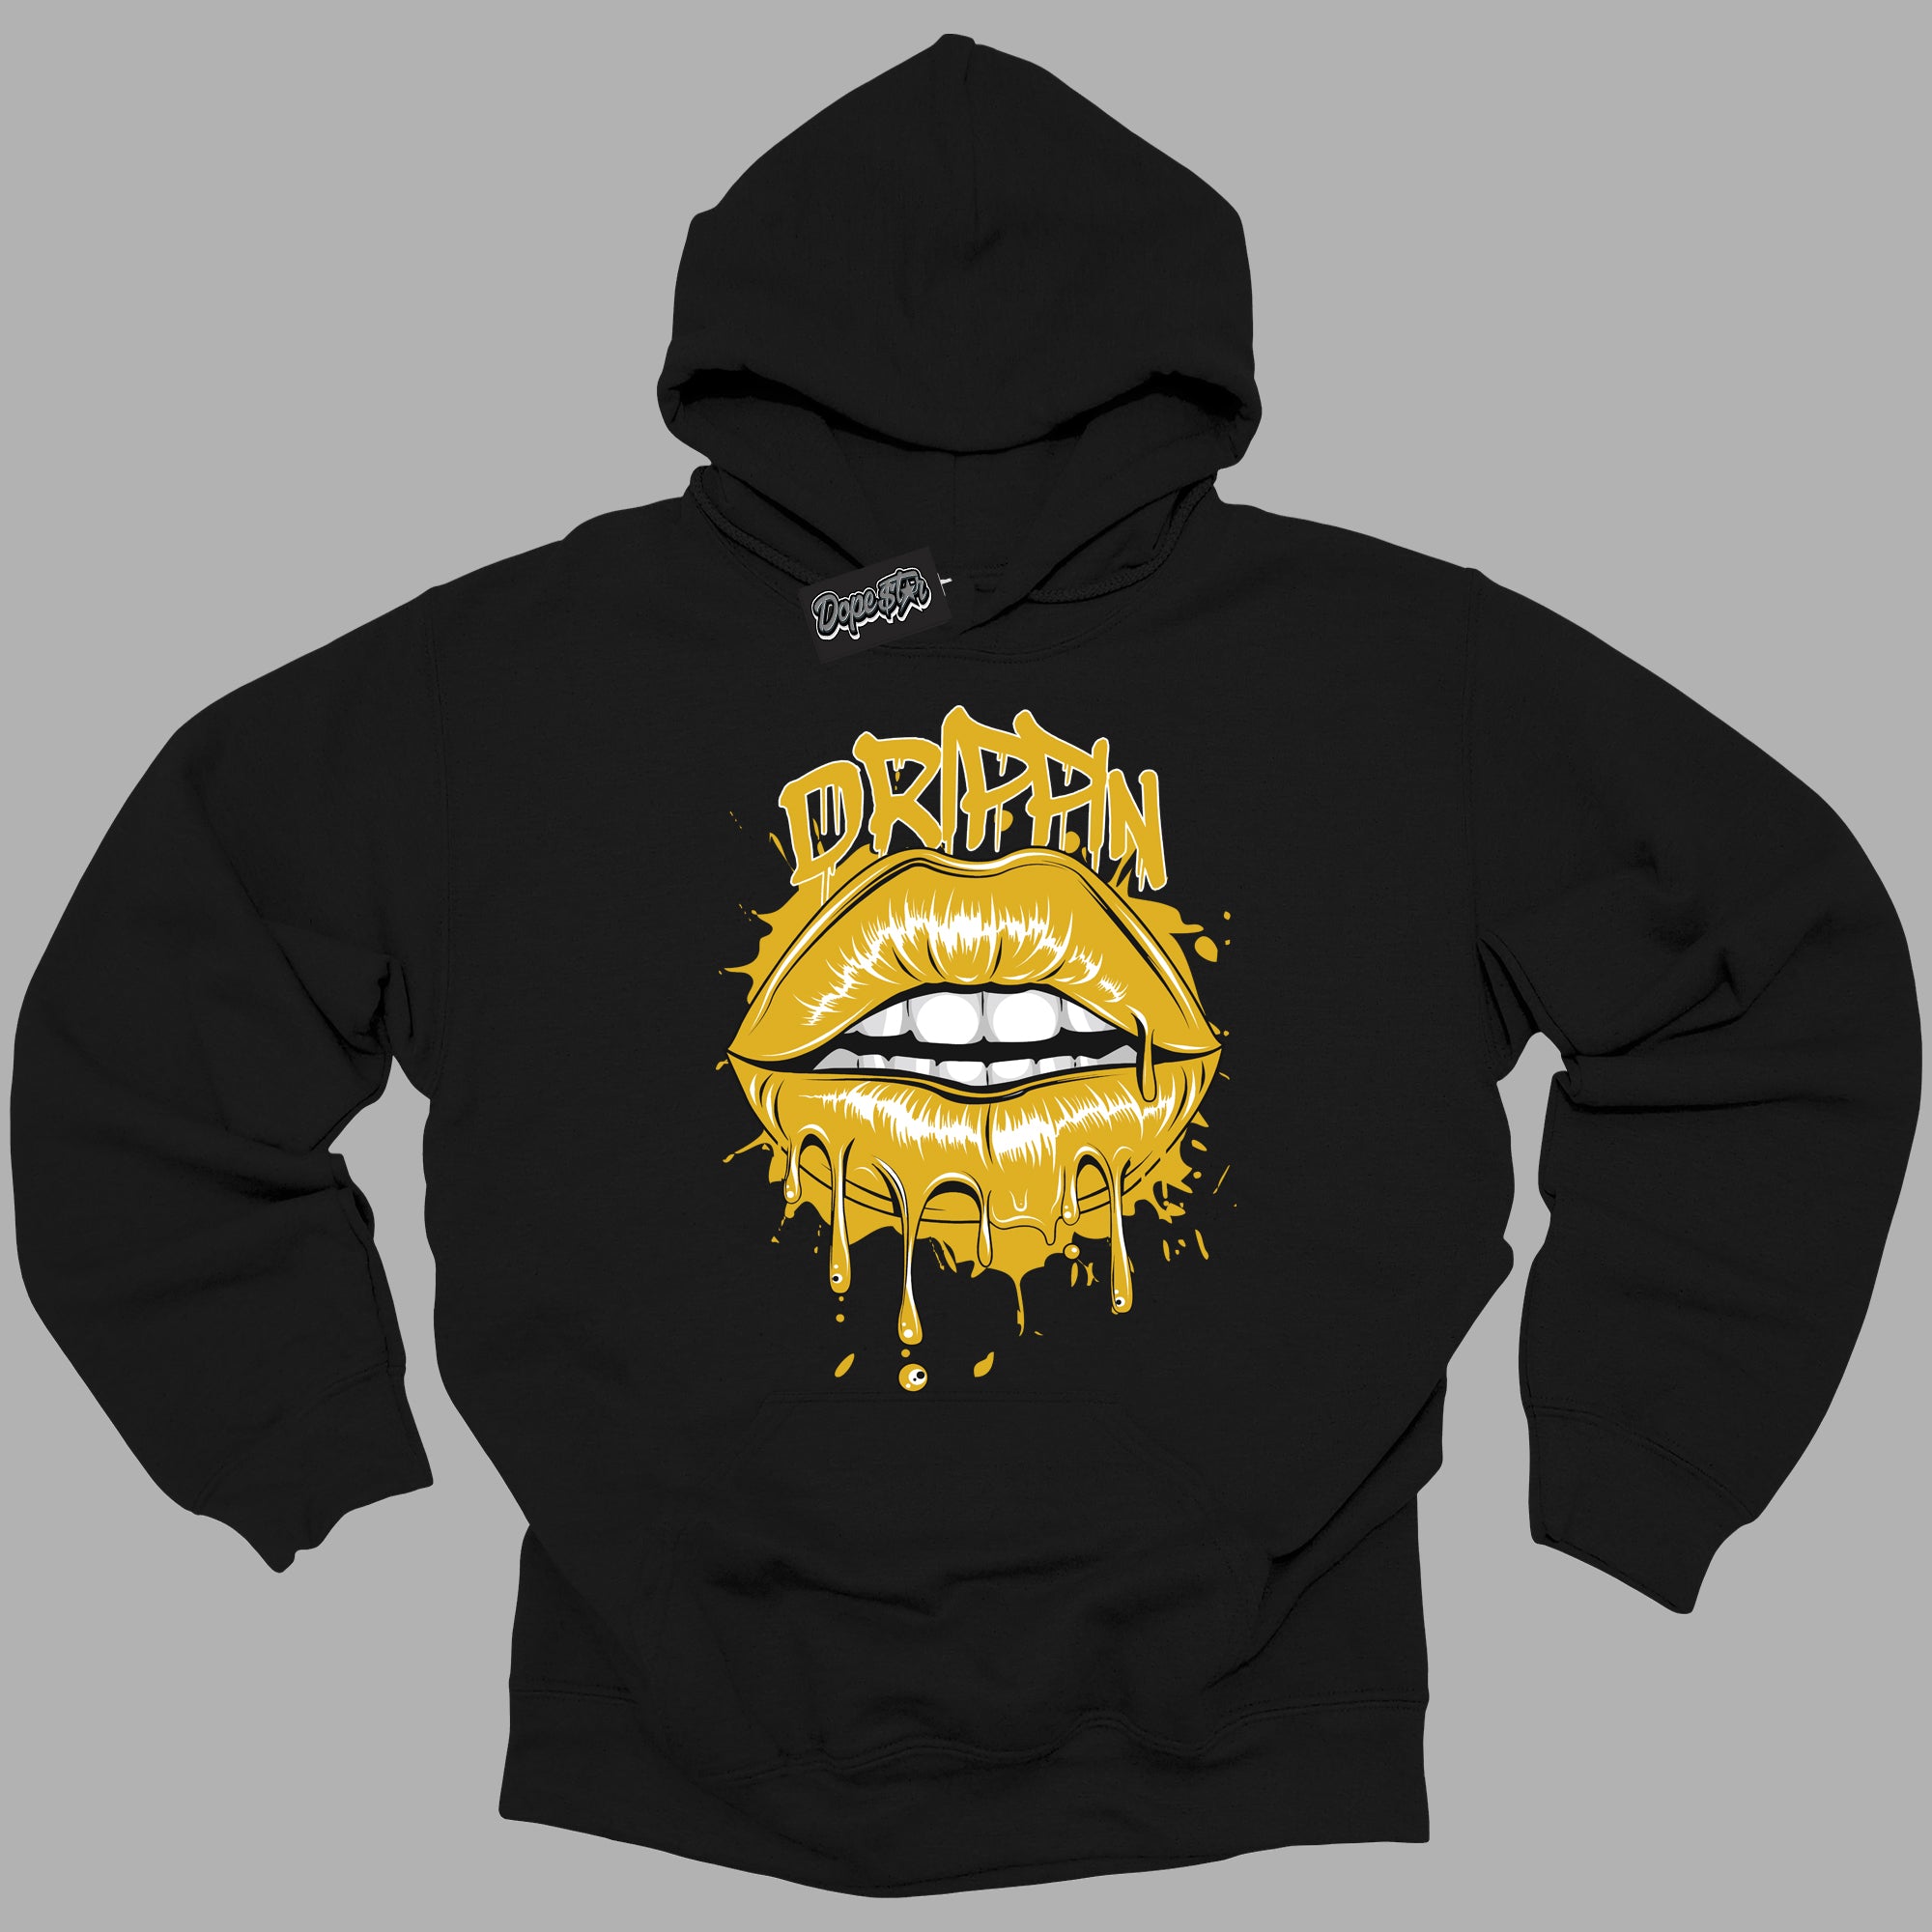 Cool Black Hoodie with “ Drippin ”  design that Perfectly Matches Yellow Ochre 6s Sneakers.